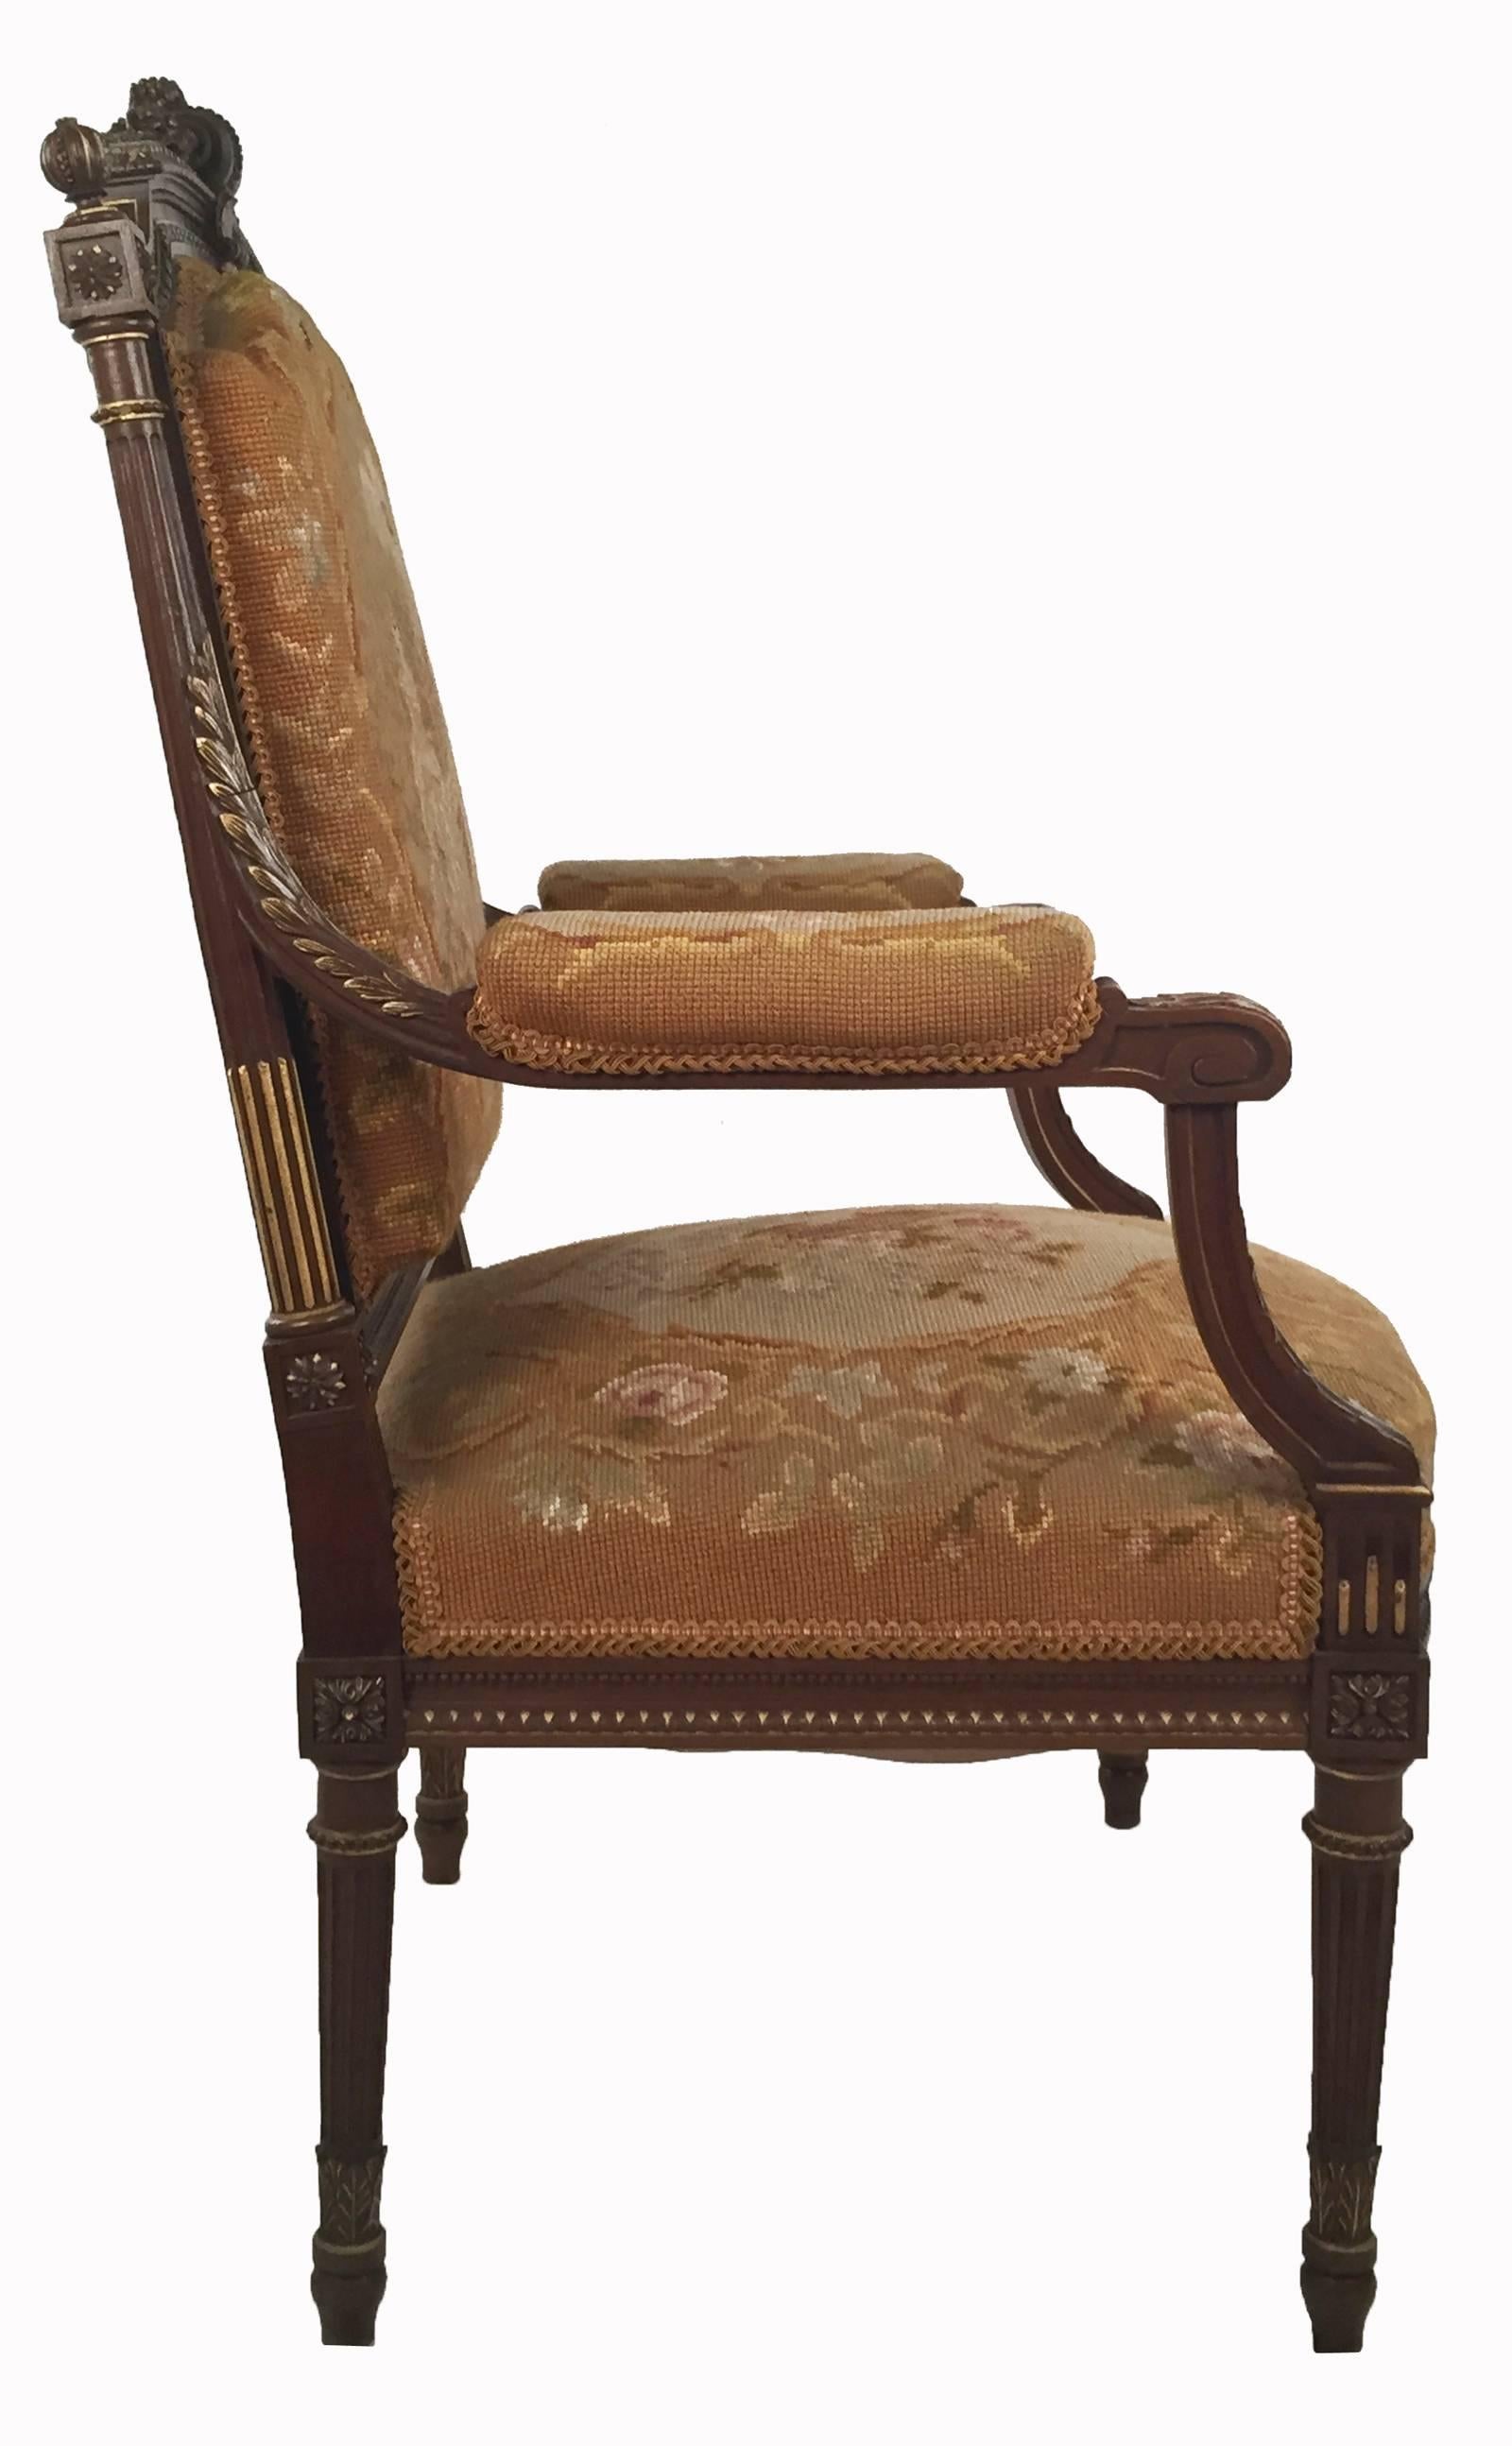 French Set of Louis XVI Style Walnut and Parcel-Gilt Needlepoint-Upholstered Armchairs